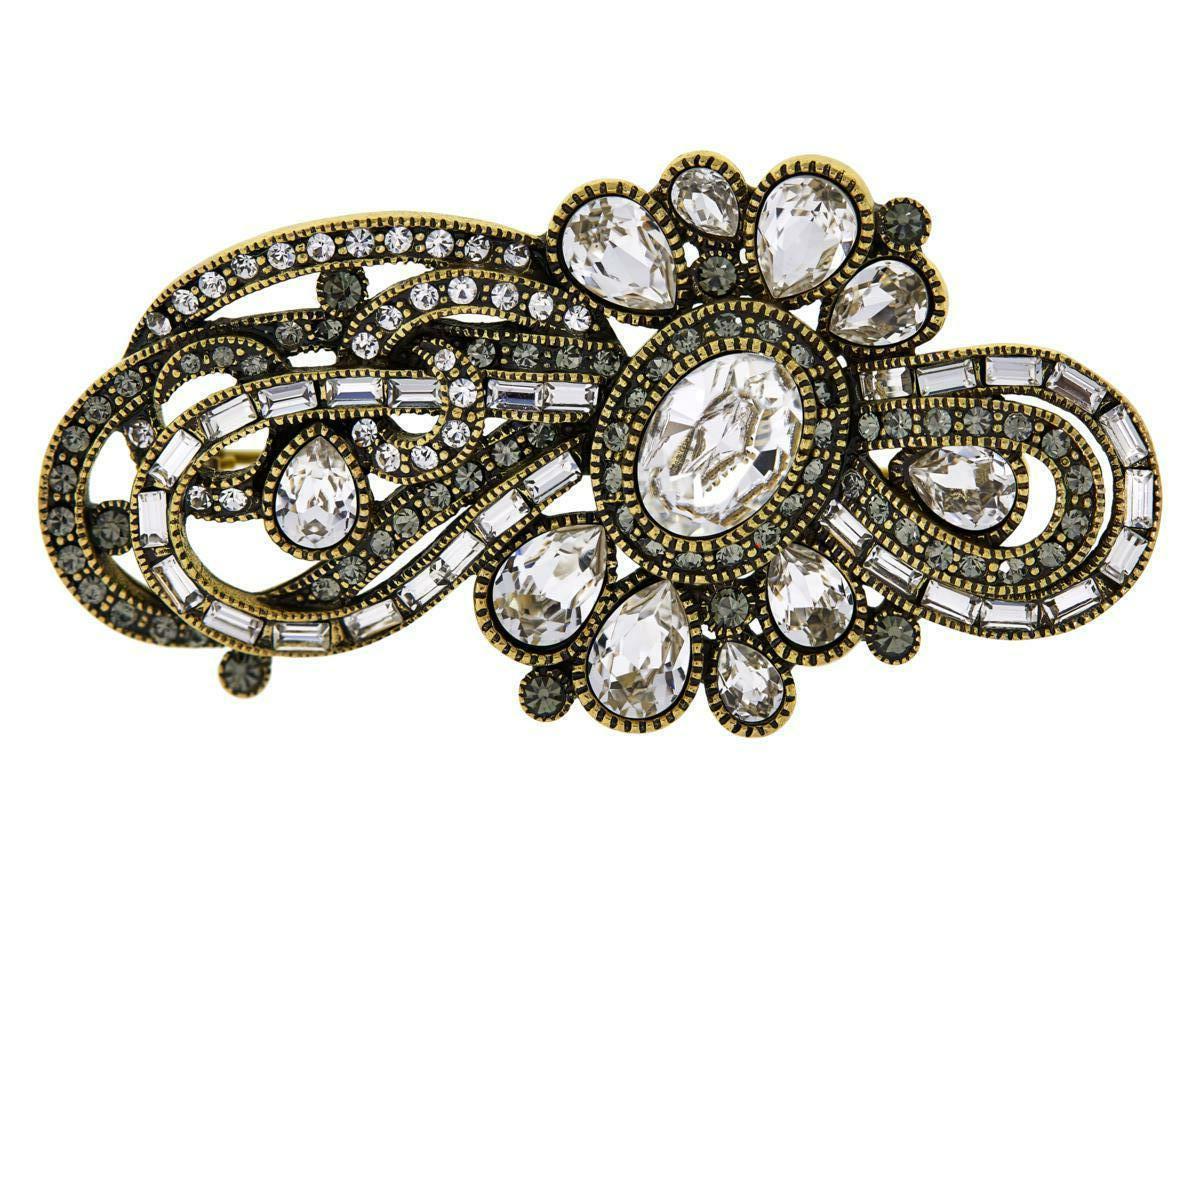 Modern Heidi Daus Classically Curated Crystal Accented Pin Brooch For Sale